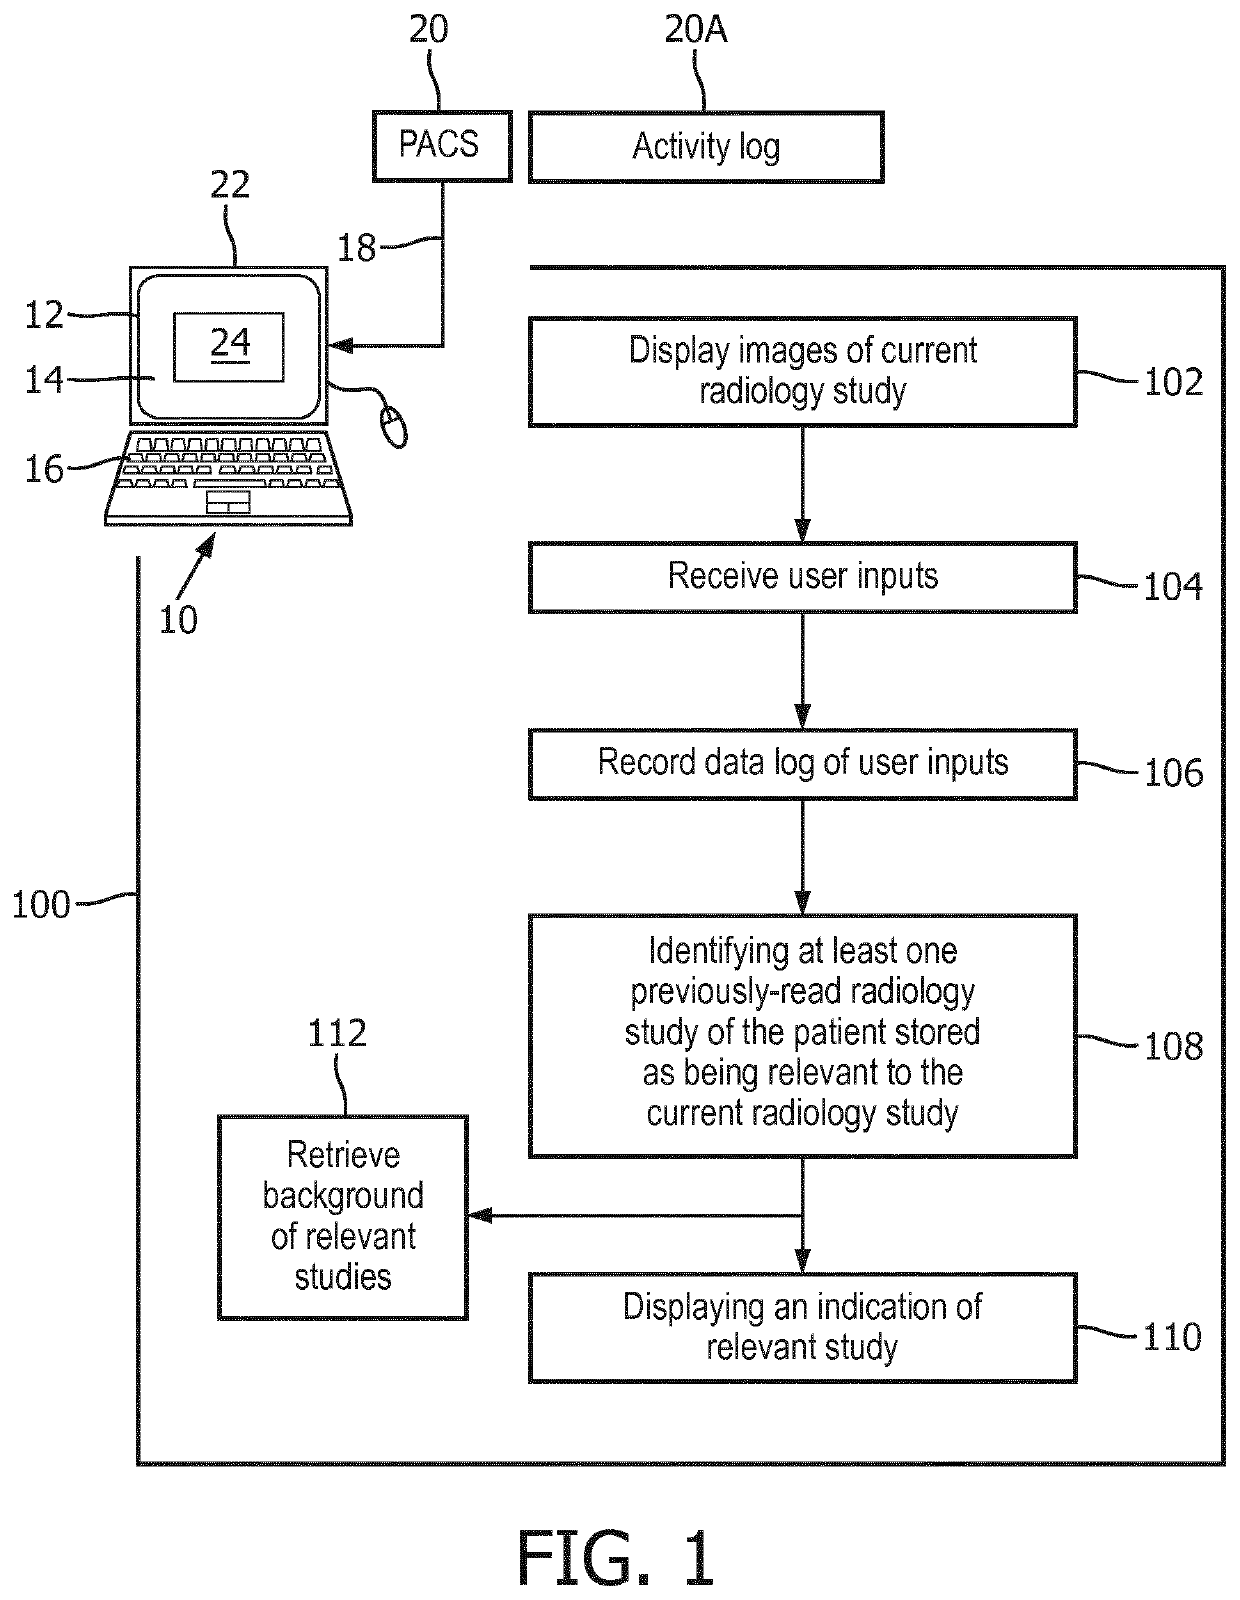 System and method to determine relevant prior radiology studies using pacs log files